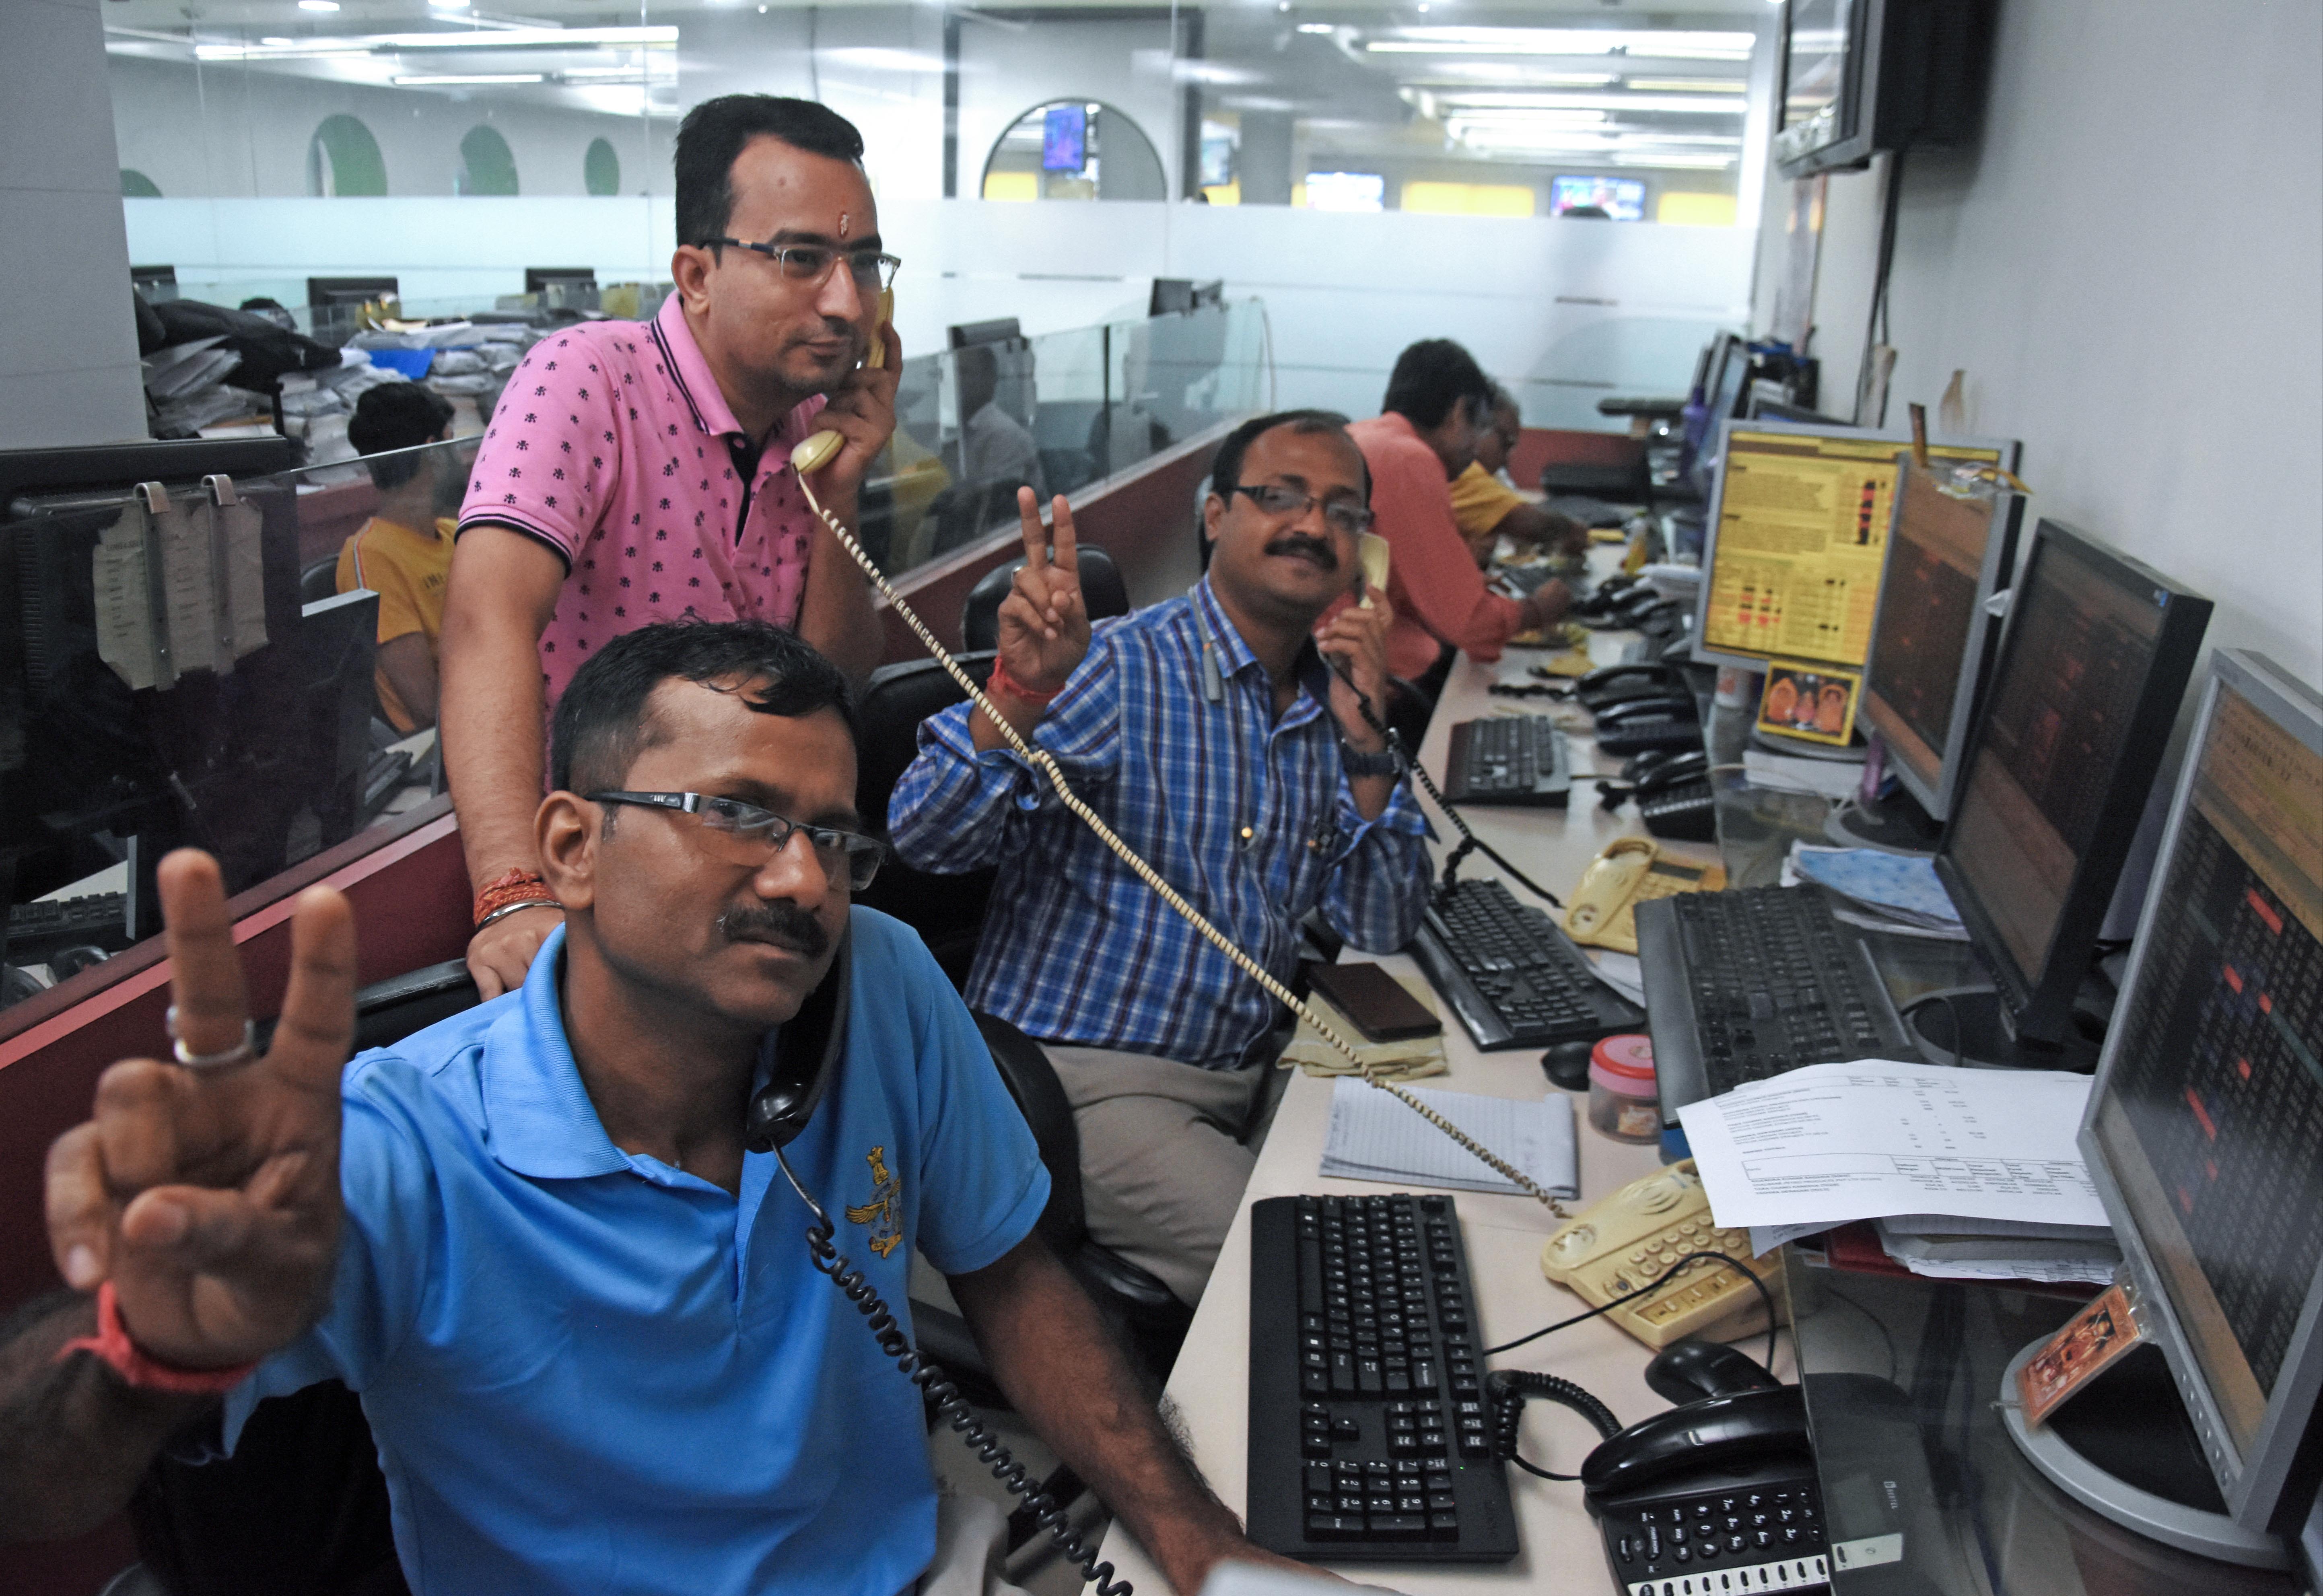 Backed by economic growth forecast and political stability, Indian stocks boom